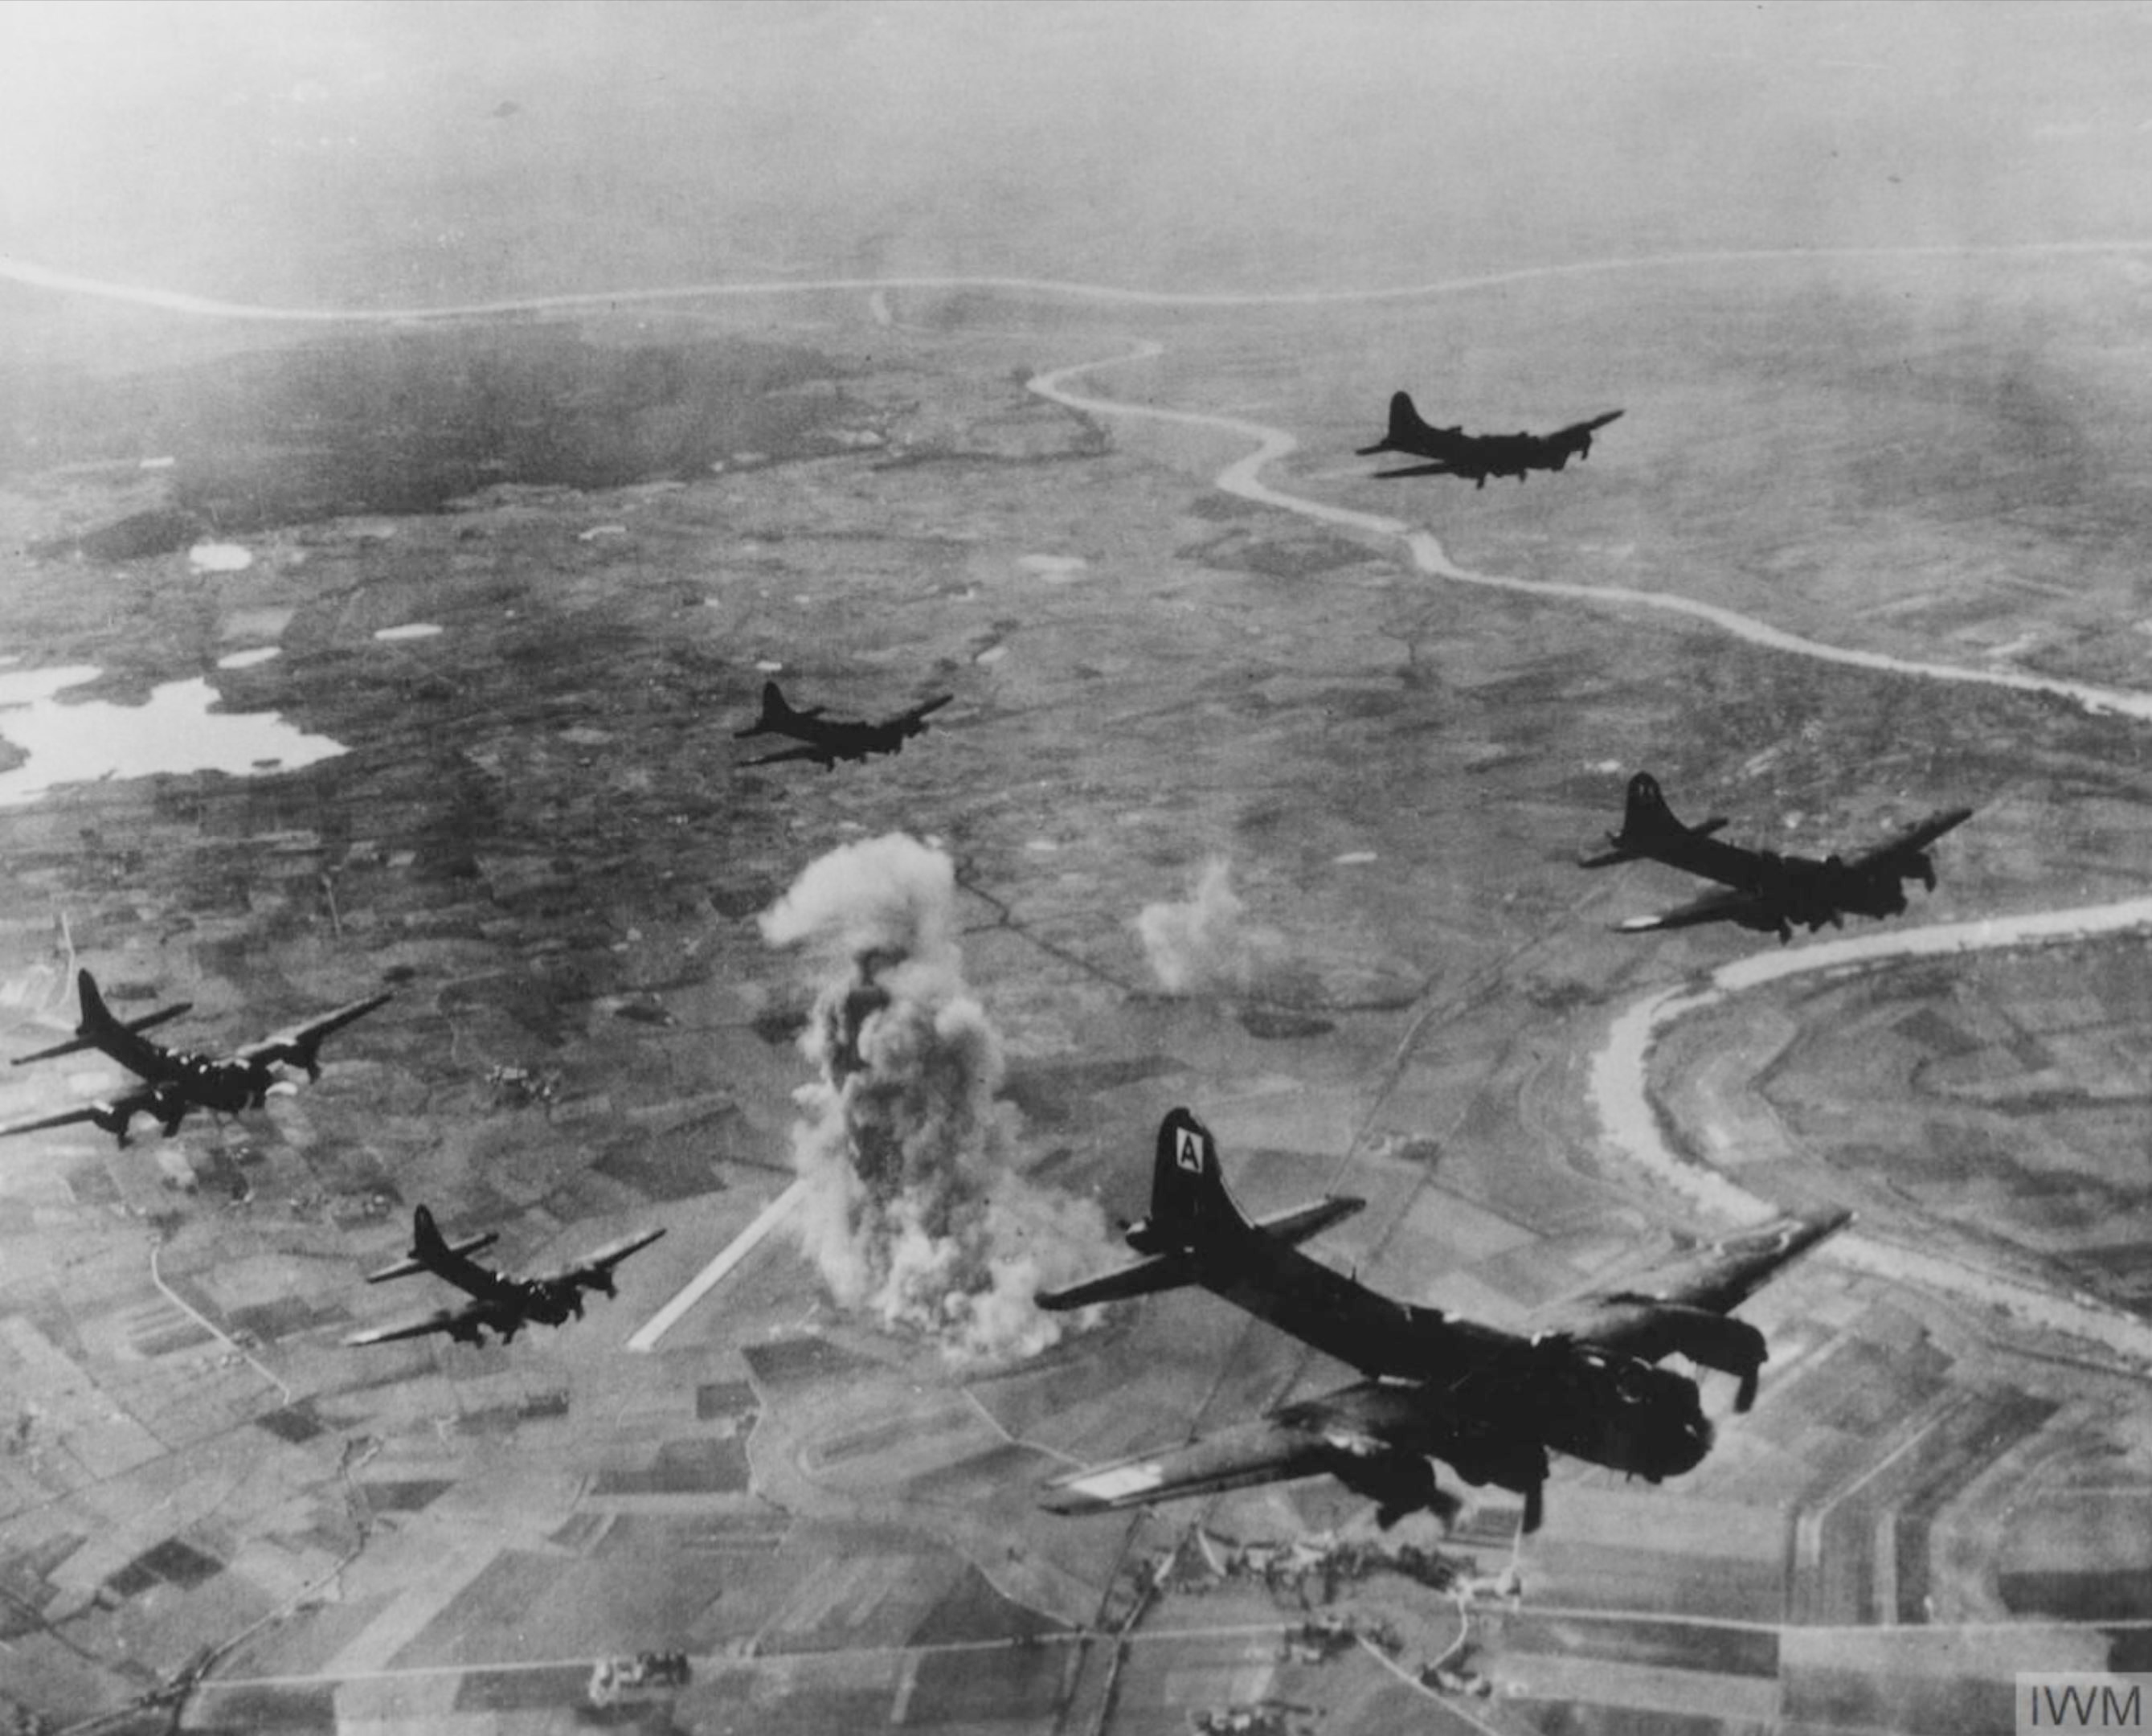 Target 8AF 94BG B 17 Fortresses leaving the drop zone 9th Oct 1943 FRE3864